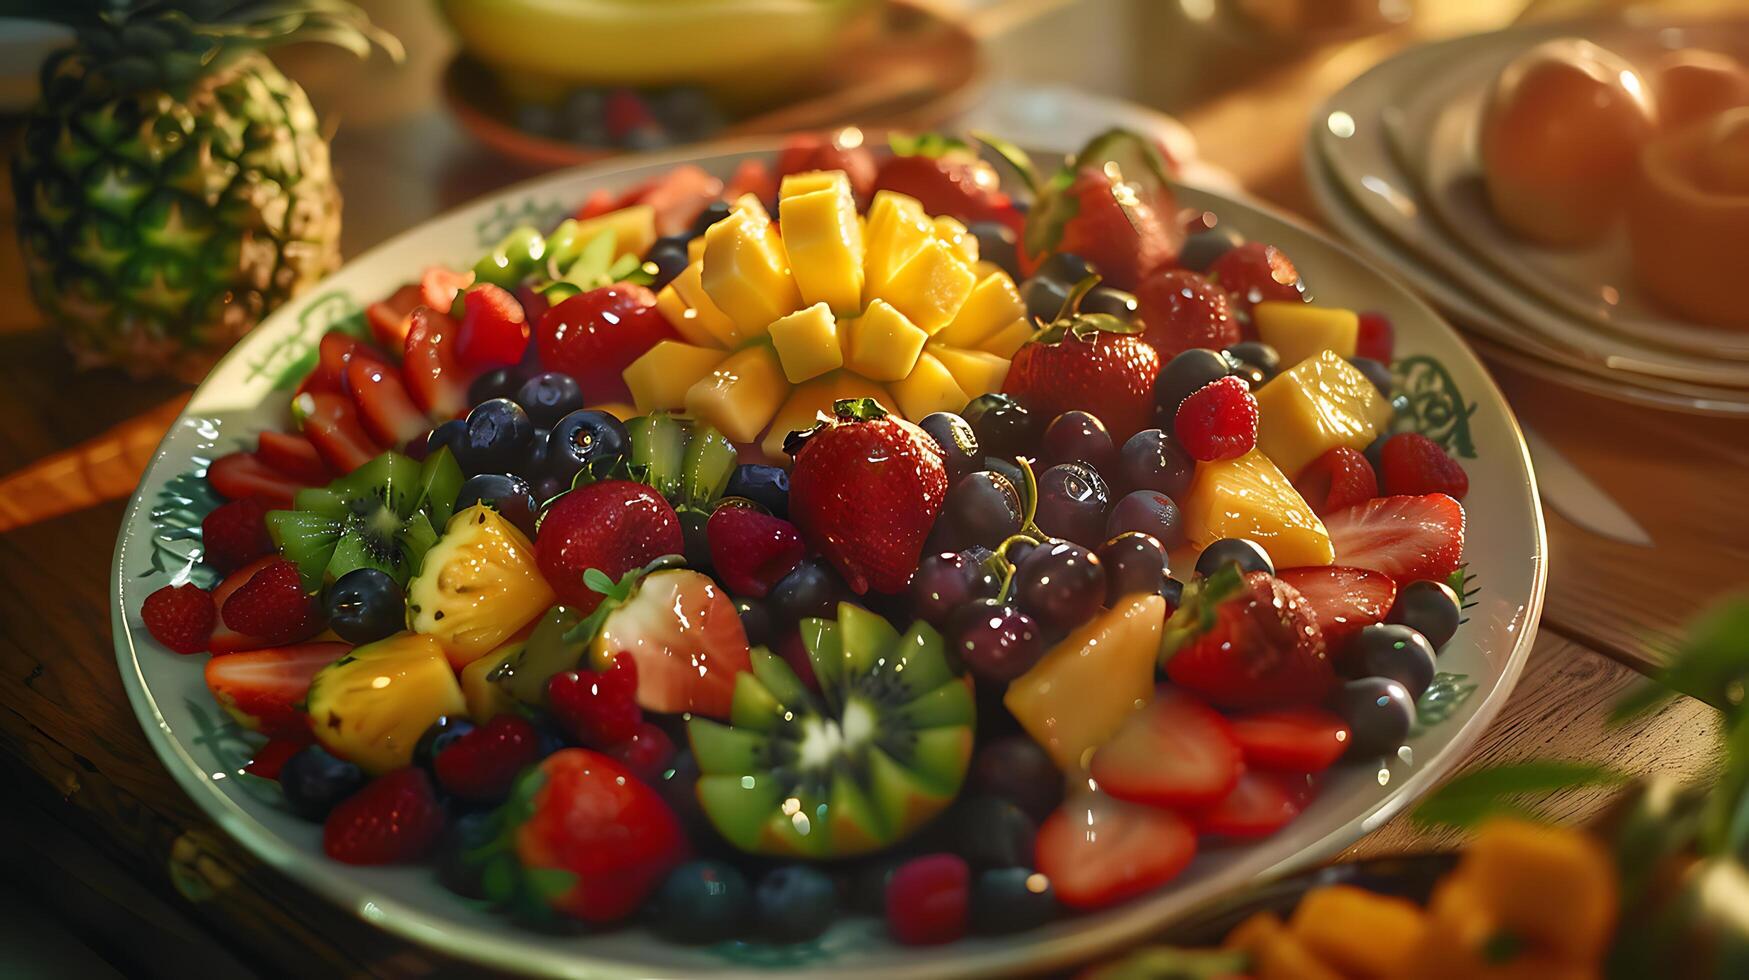 AI generated Vibrant Fruit Platter Creates Colorful Centerpiece in Rustic Kitchen Captured with 50mm Lens photo